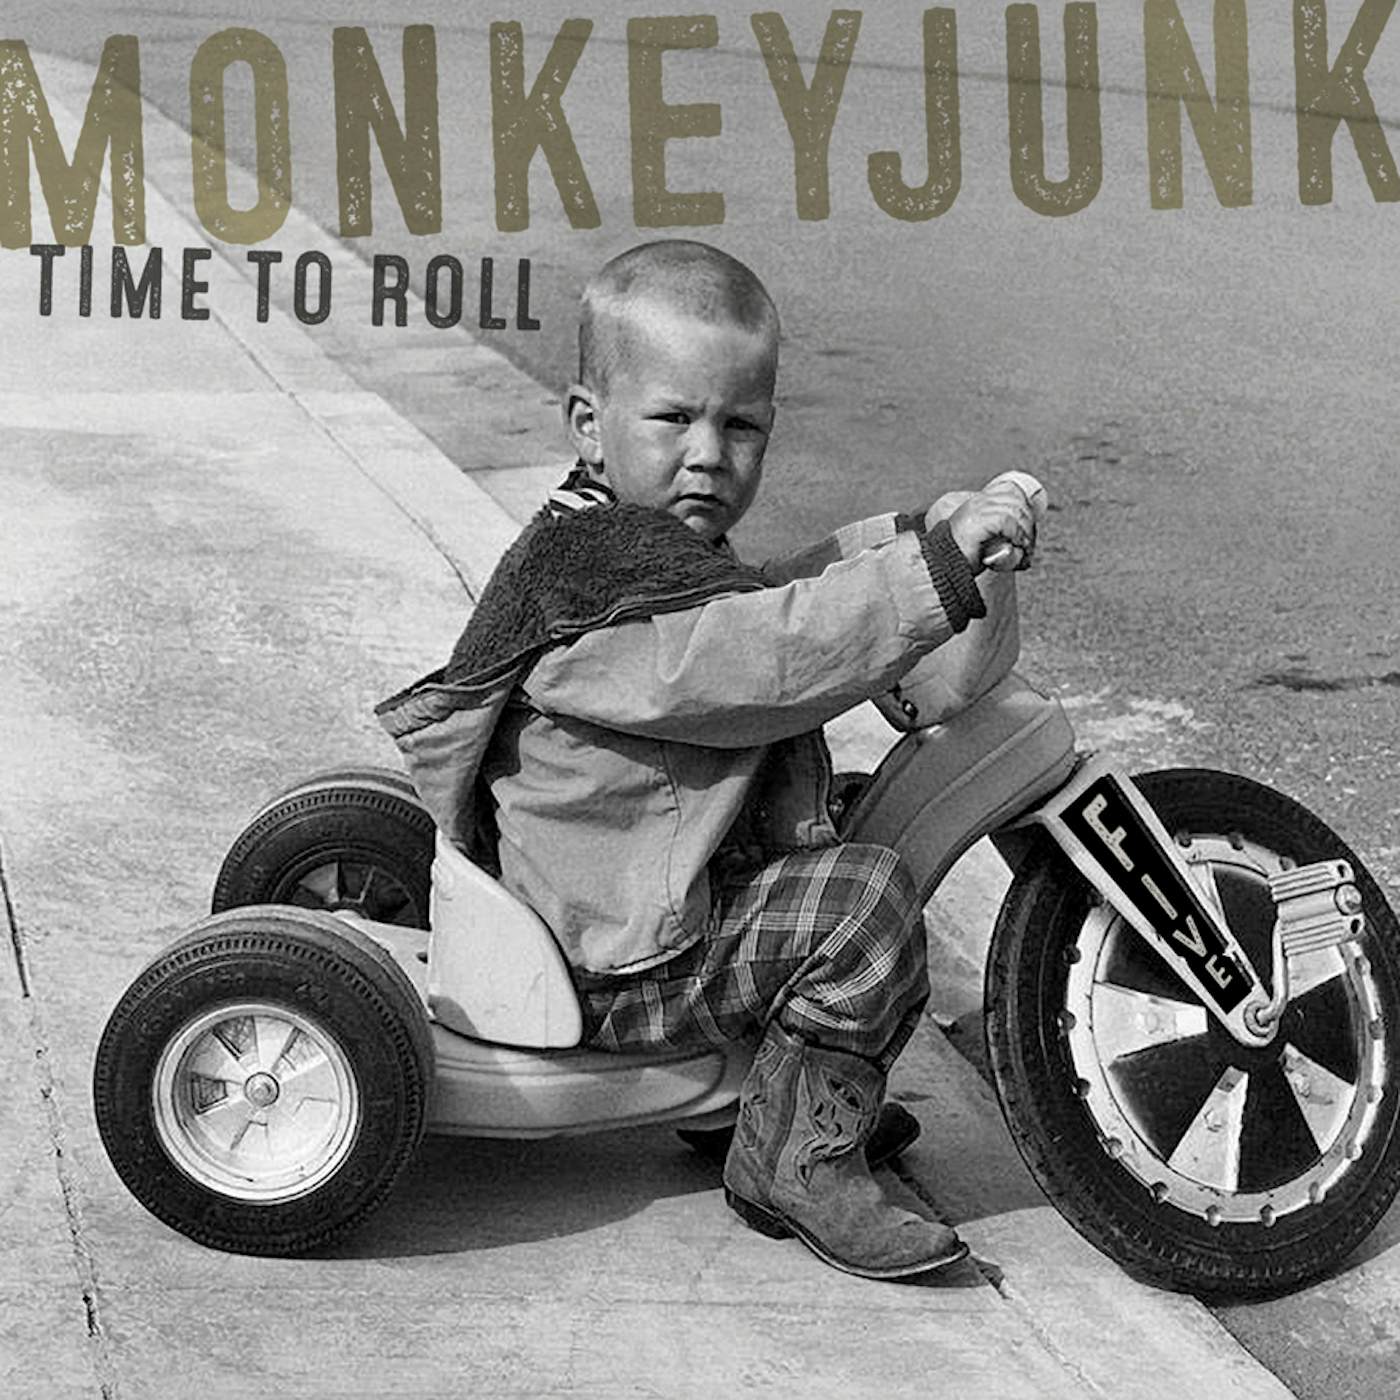 MonkeyJunk TIME TO ROLL CD